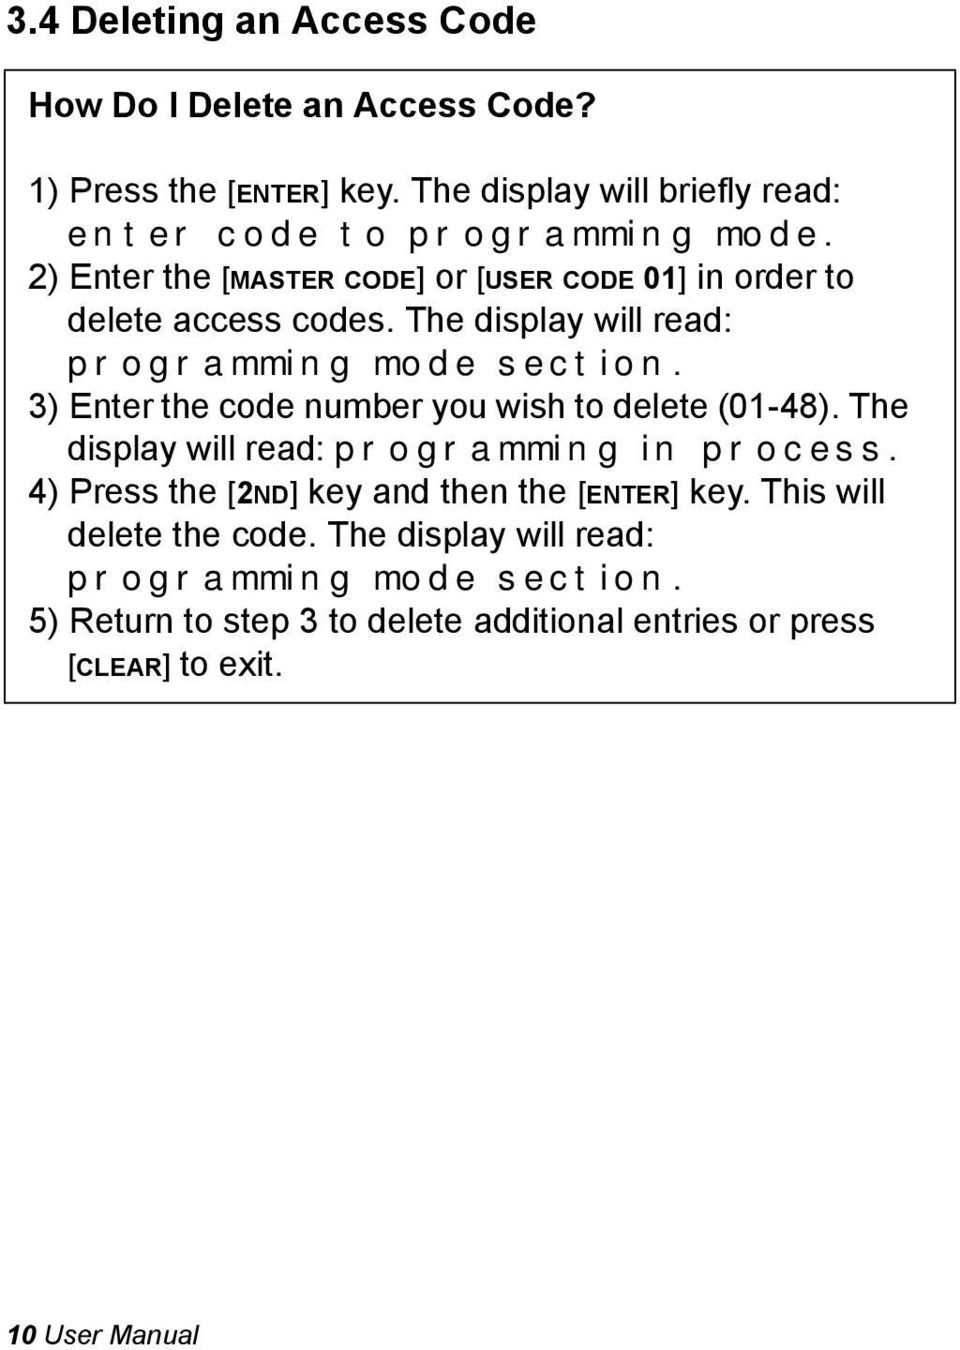 3) Enter the code number you wish to delete (01-48). The display will read: programming in process. 4) Press the [2ND] key and then the [ENTER] key.